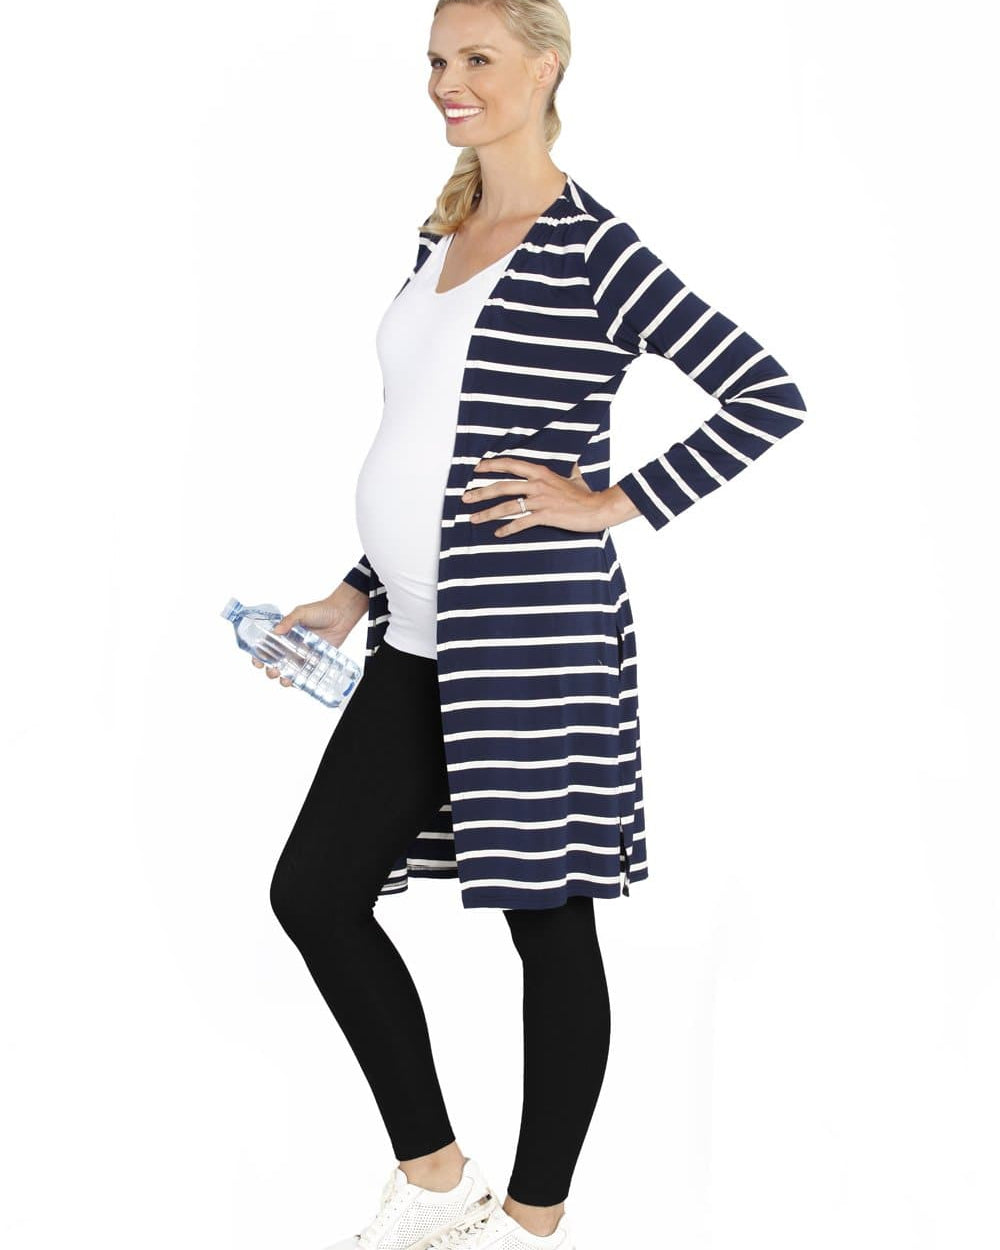 Nursing Lounge Outfit - Perfect Hospital Set - Angel Maternity - Maternity clothes - shop online (10810327765)